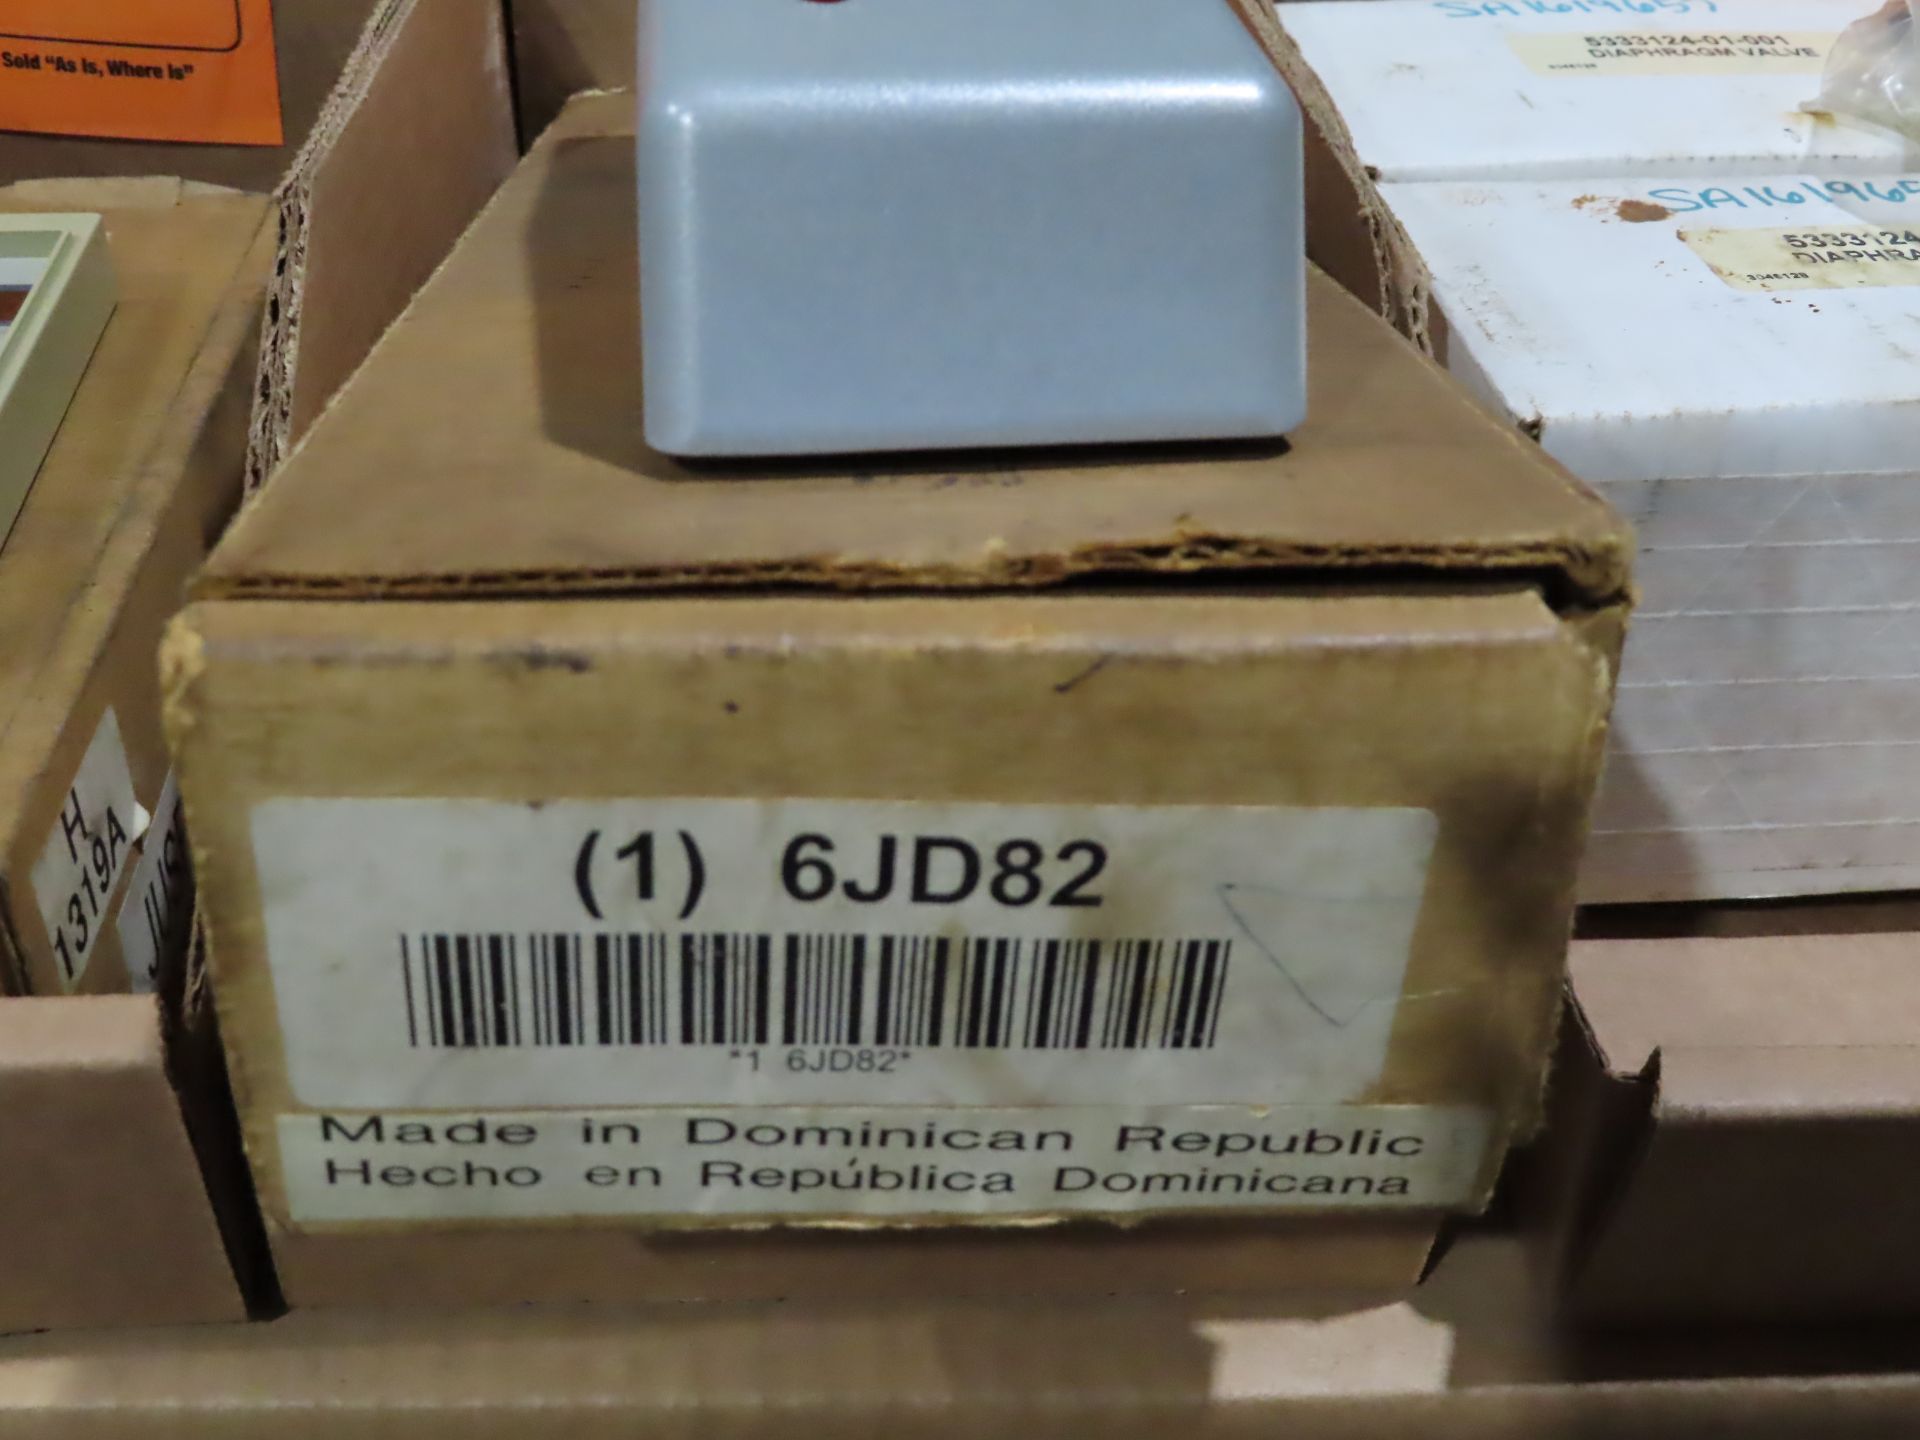 Model 6JD82 exit door alarm, as always with Brolyn LLC auctions, all lots can be picked up from - Image 2 of 2